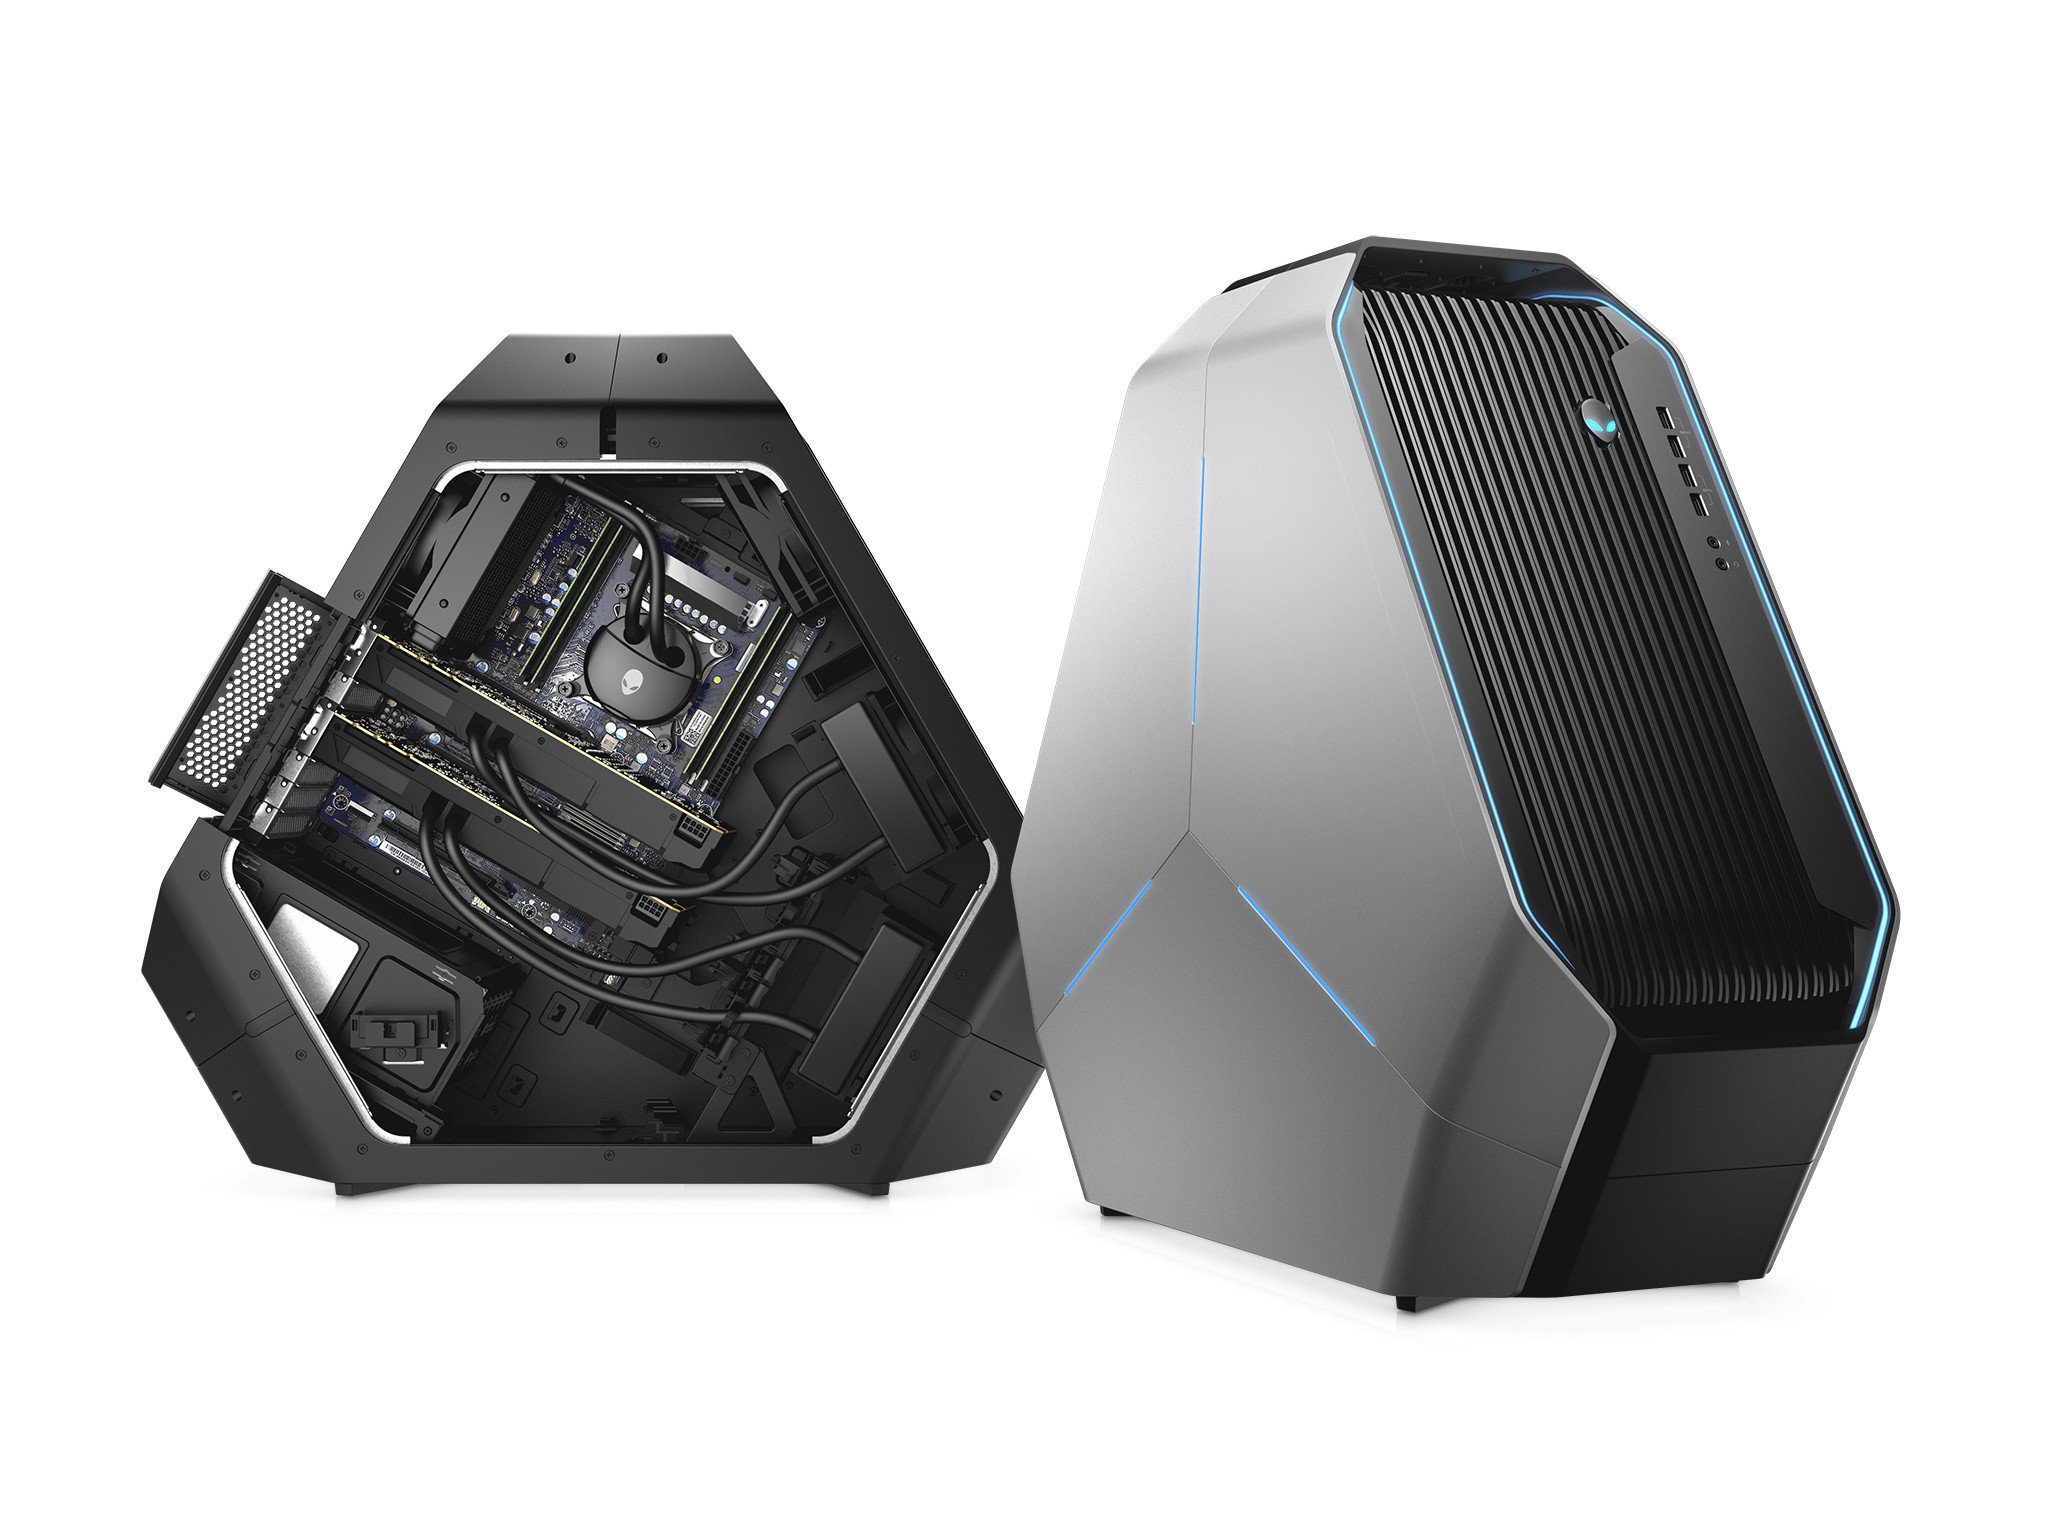 Alienware Area-51 embraces sheer power with 2nd generation Threadripper processors